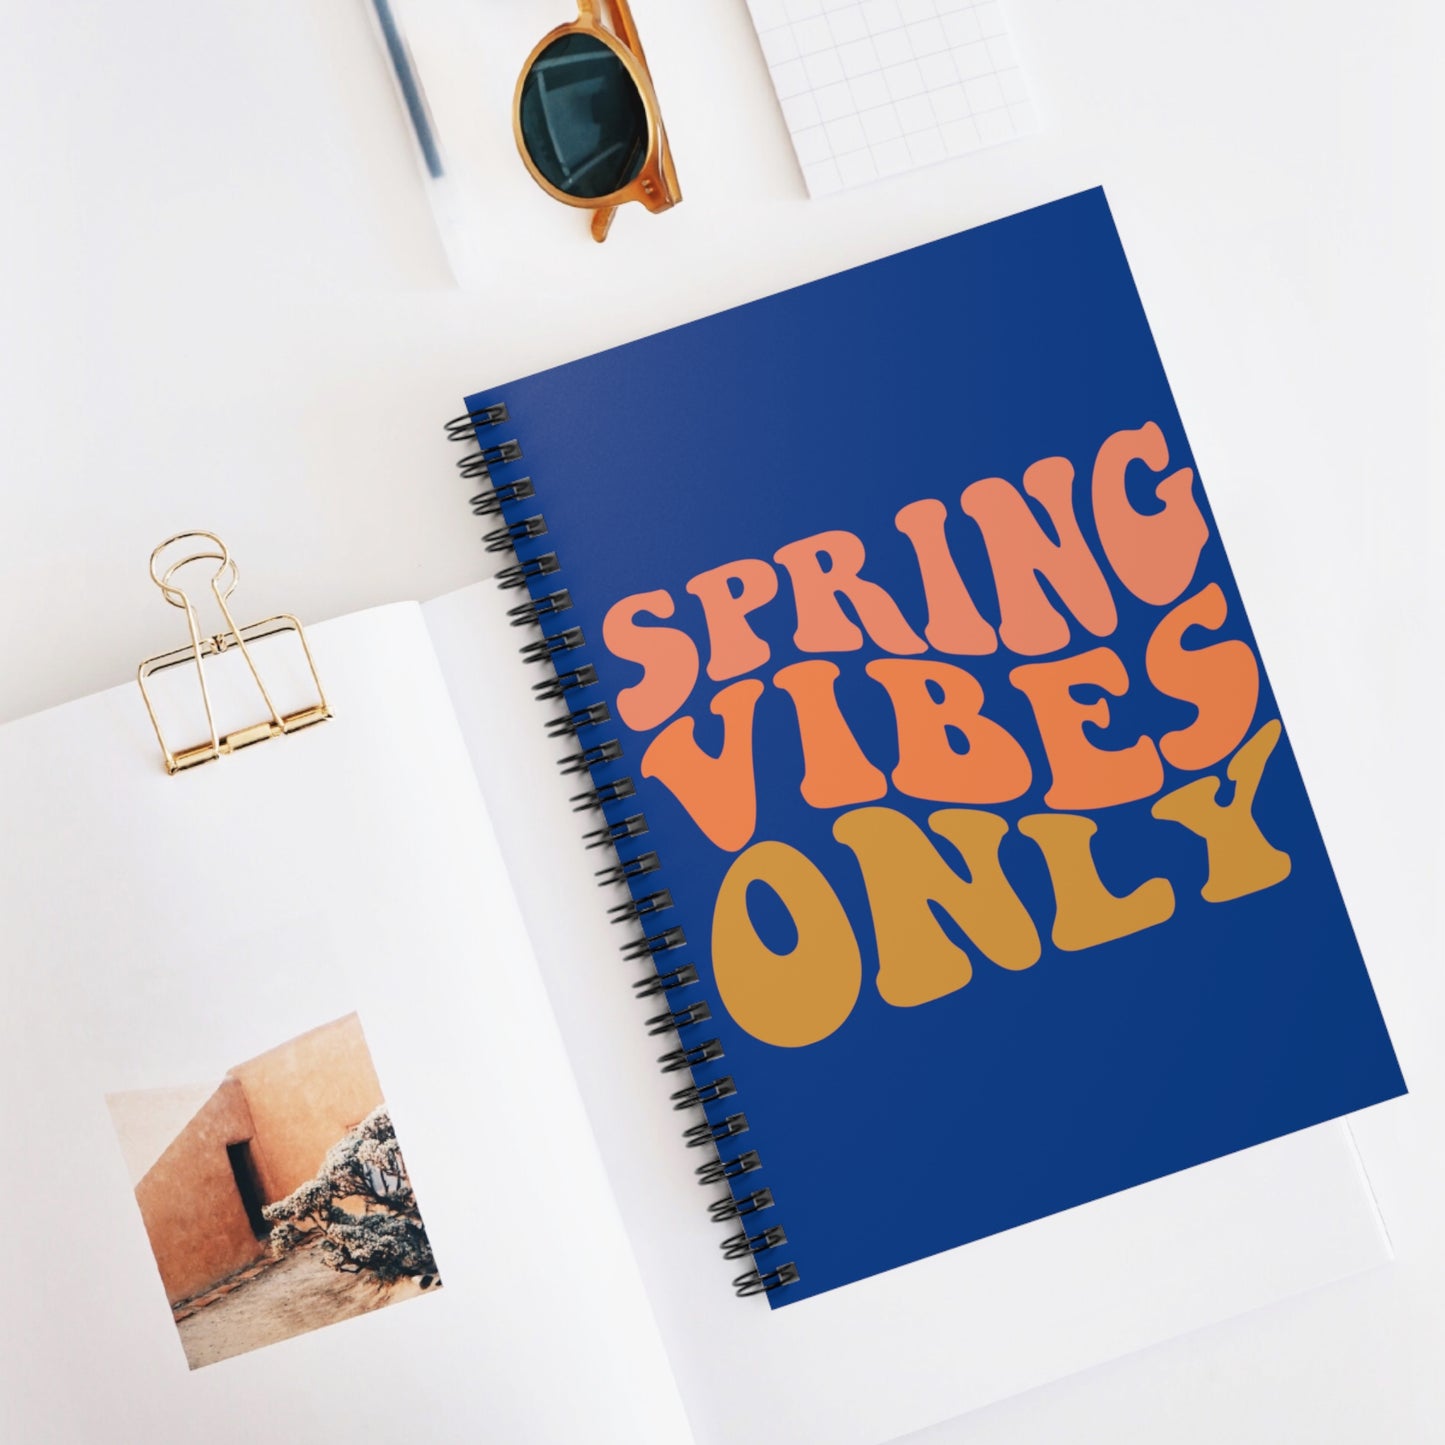 Spring Vibes Only: Spiral Notebook - Log Books - Journals - Diaries - and More Custom Printed by TheGlassyLass.com